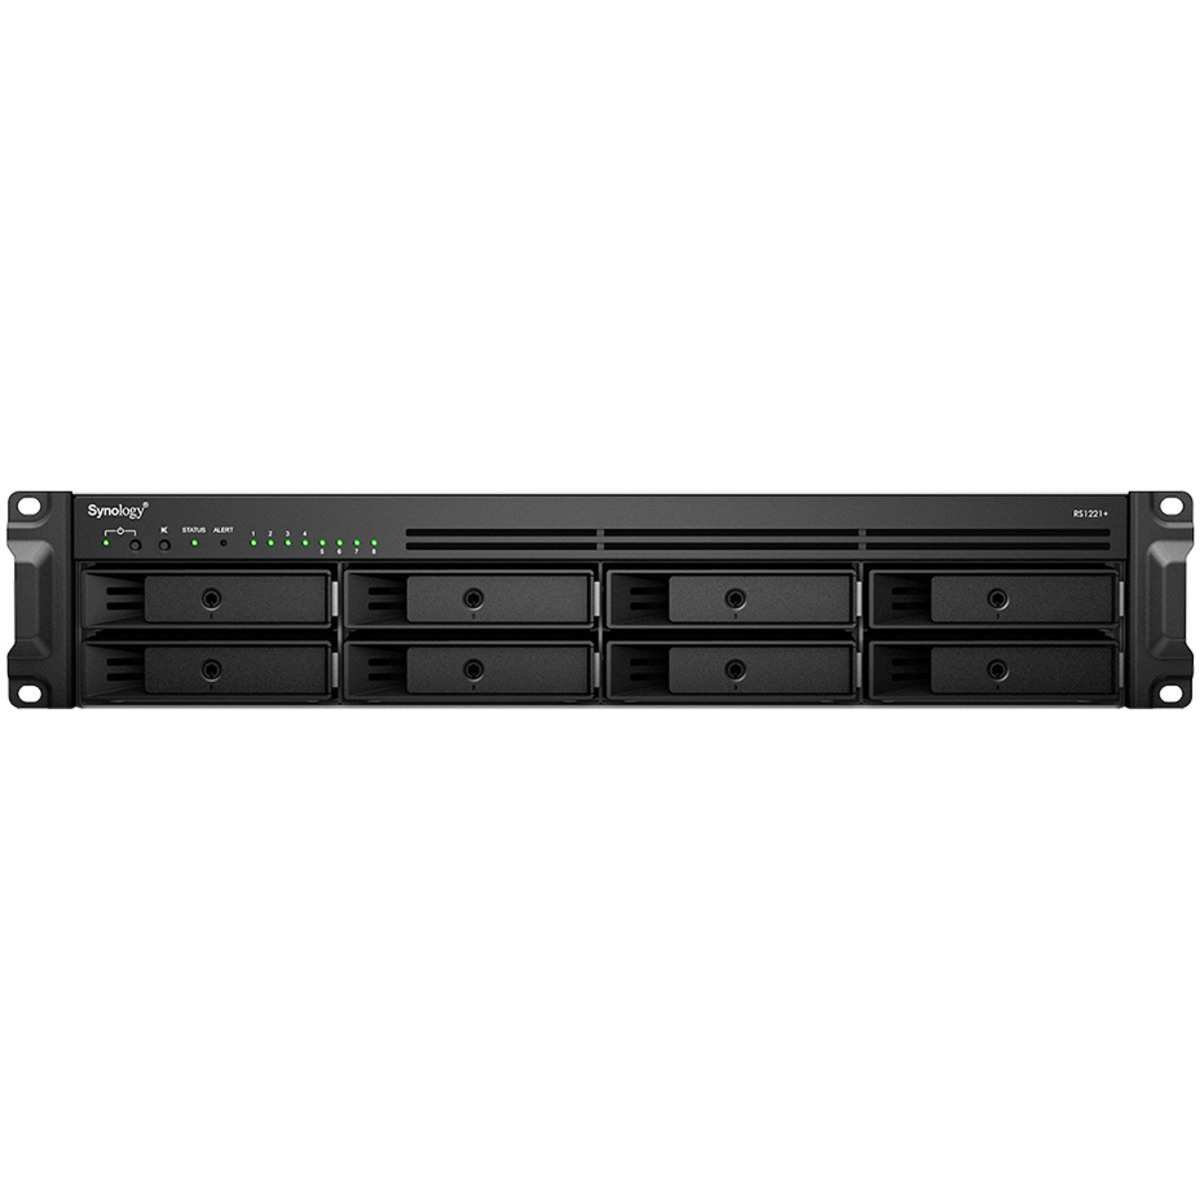 Synology RackStation RS1221RP+ 24tb 8-Bay RackMount Multimedia / Power User / Business NAS - Network Attached Storage Device 6x4tb Synology HAT5300 Series HAT5300-4T 3.5 7200rpm SATA 6Gb/s HDD ENTERPRISE Class Drives Installed - Burn-In Tested - FREE RAM UPGRADE RackStation RS1221RP+